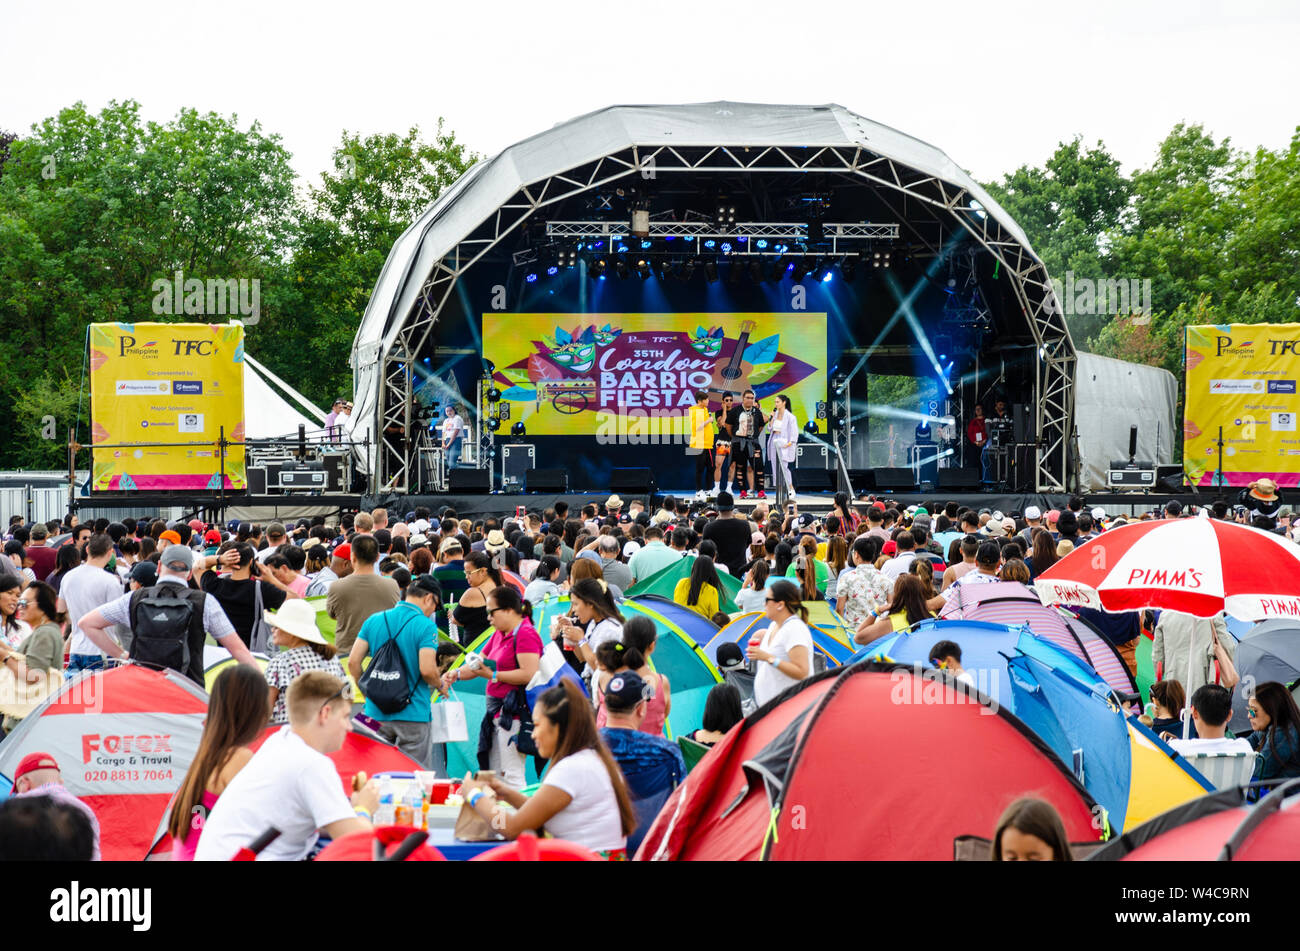 London, UK - July 21st 2019: The Barrio Fiesta 2019 took place on Apps Court Farm at Walton-on-Thames. An annual festival celebrating Filipino food and culture. Stock Photo